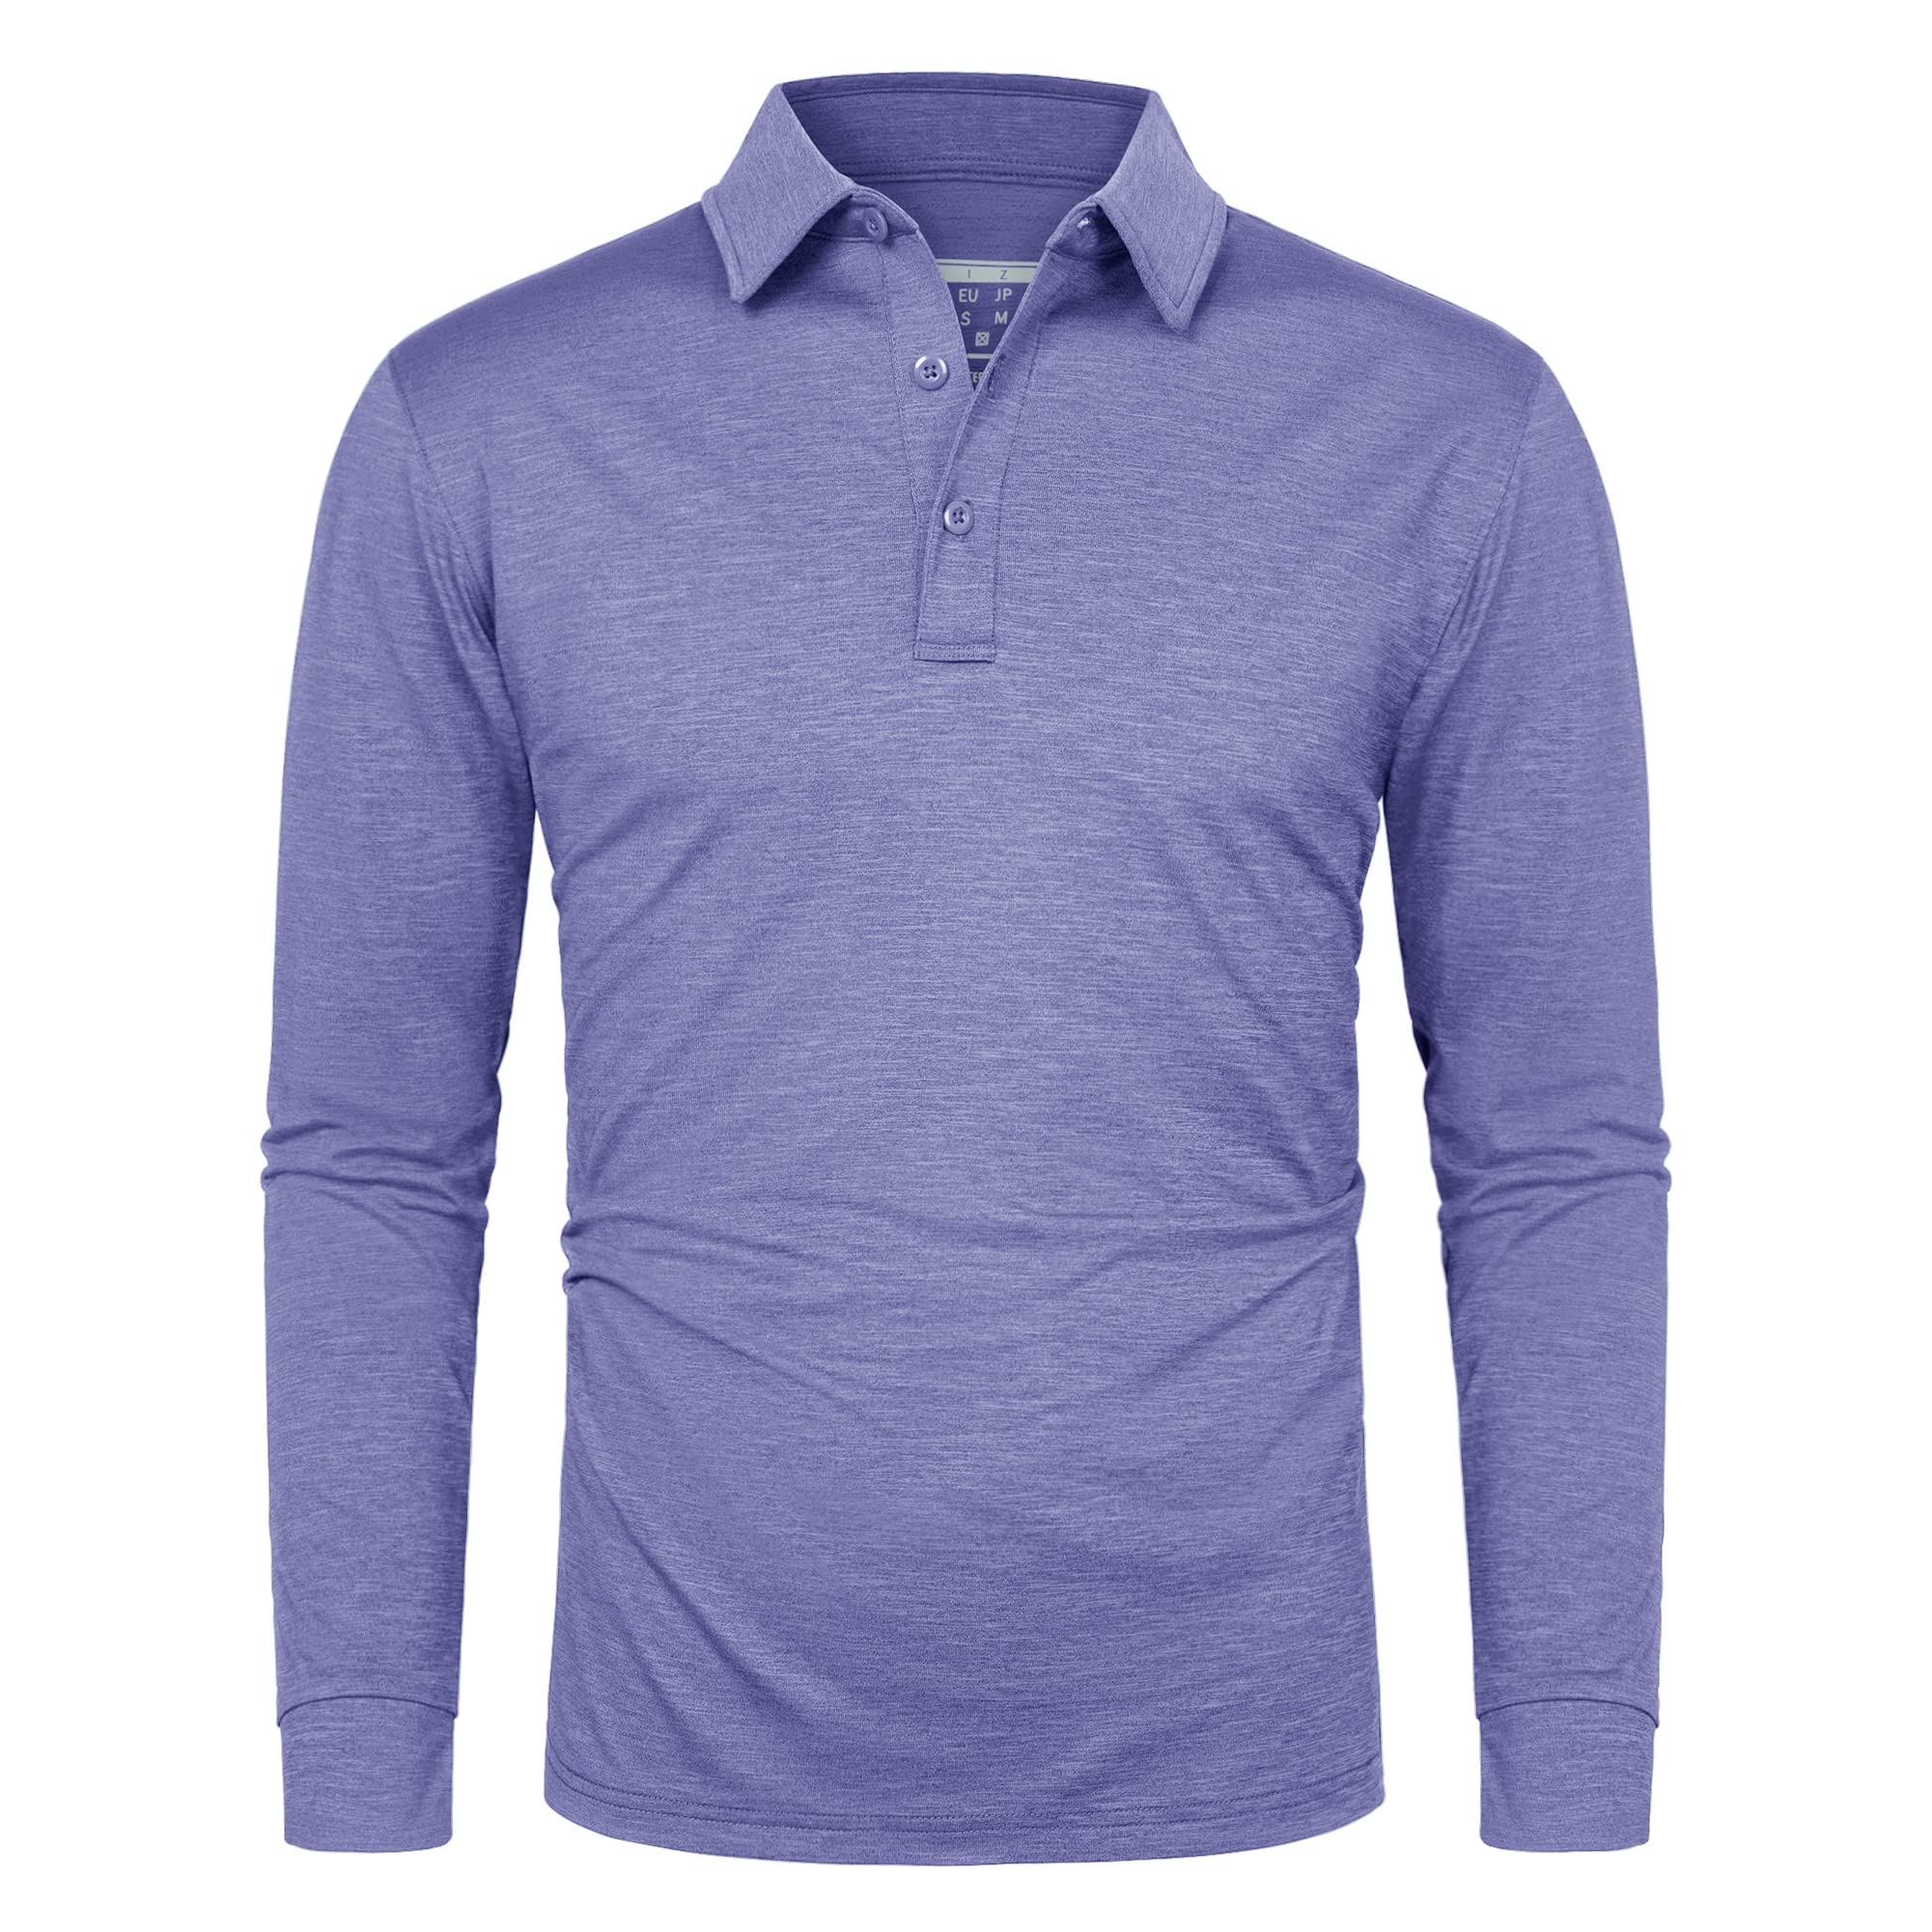 Soft Polyester Golf Polo Long Sleeve Shirt in purple